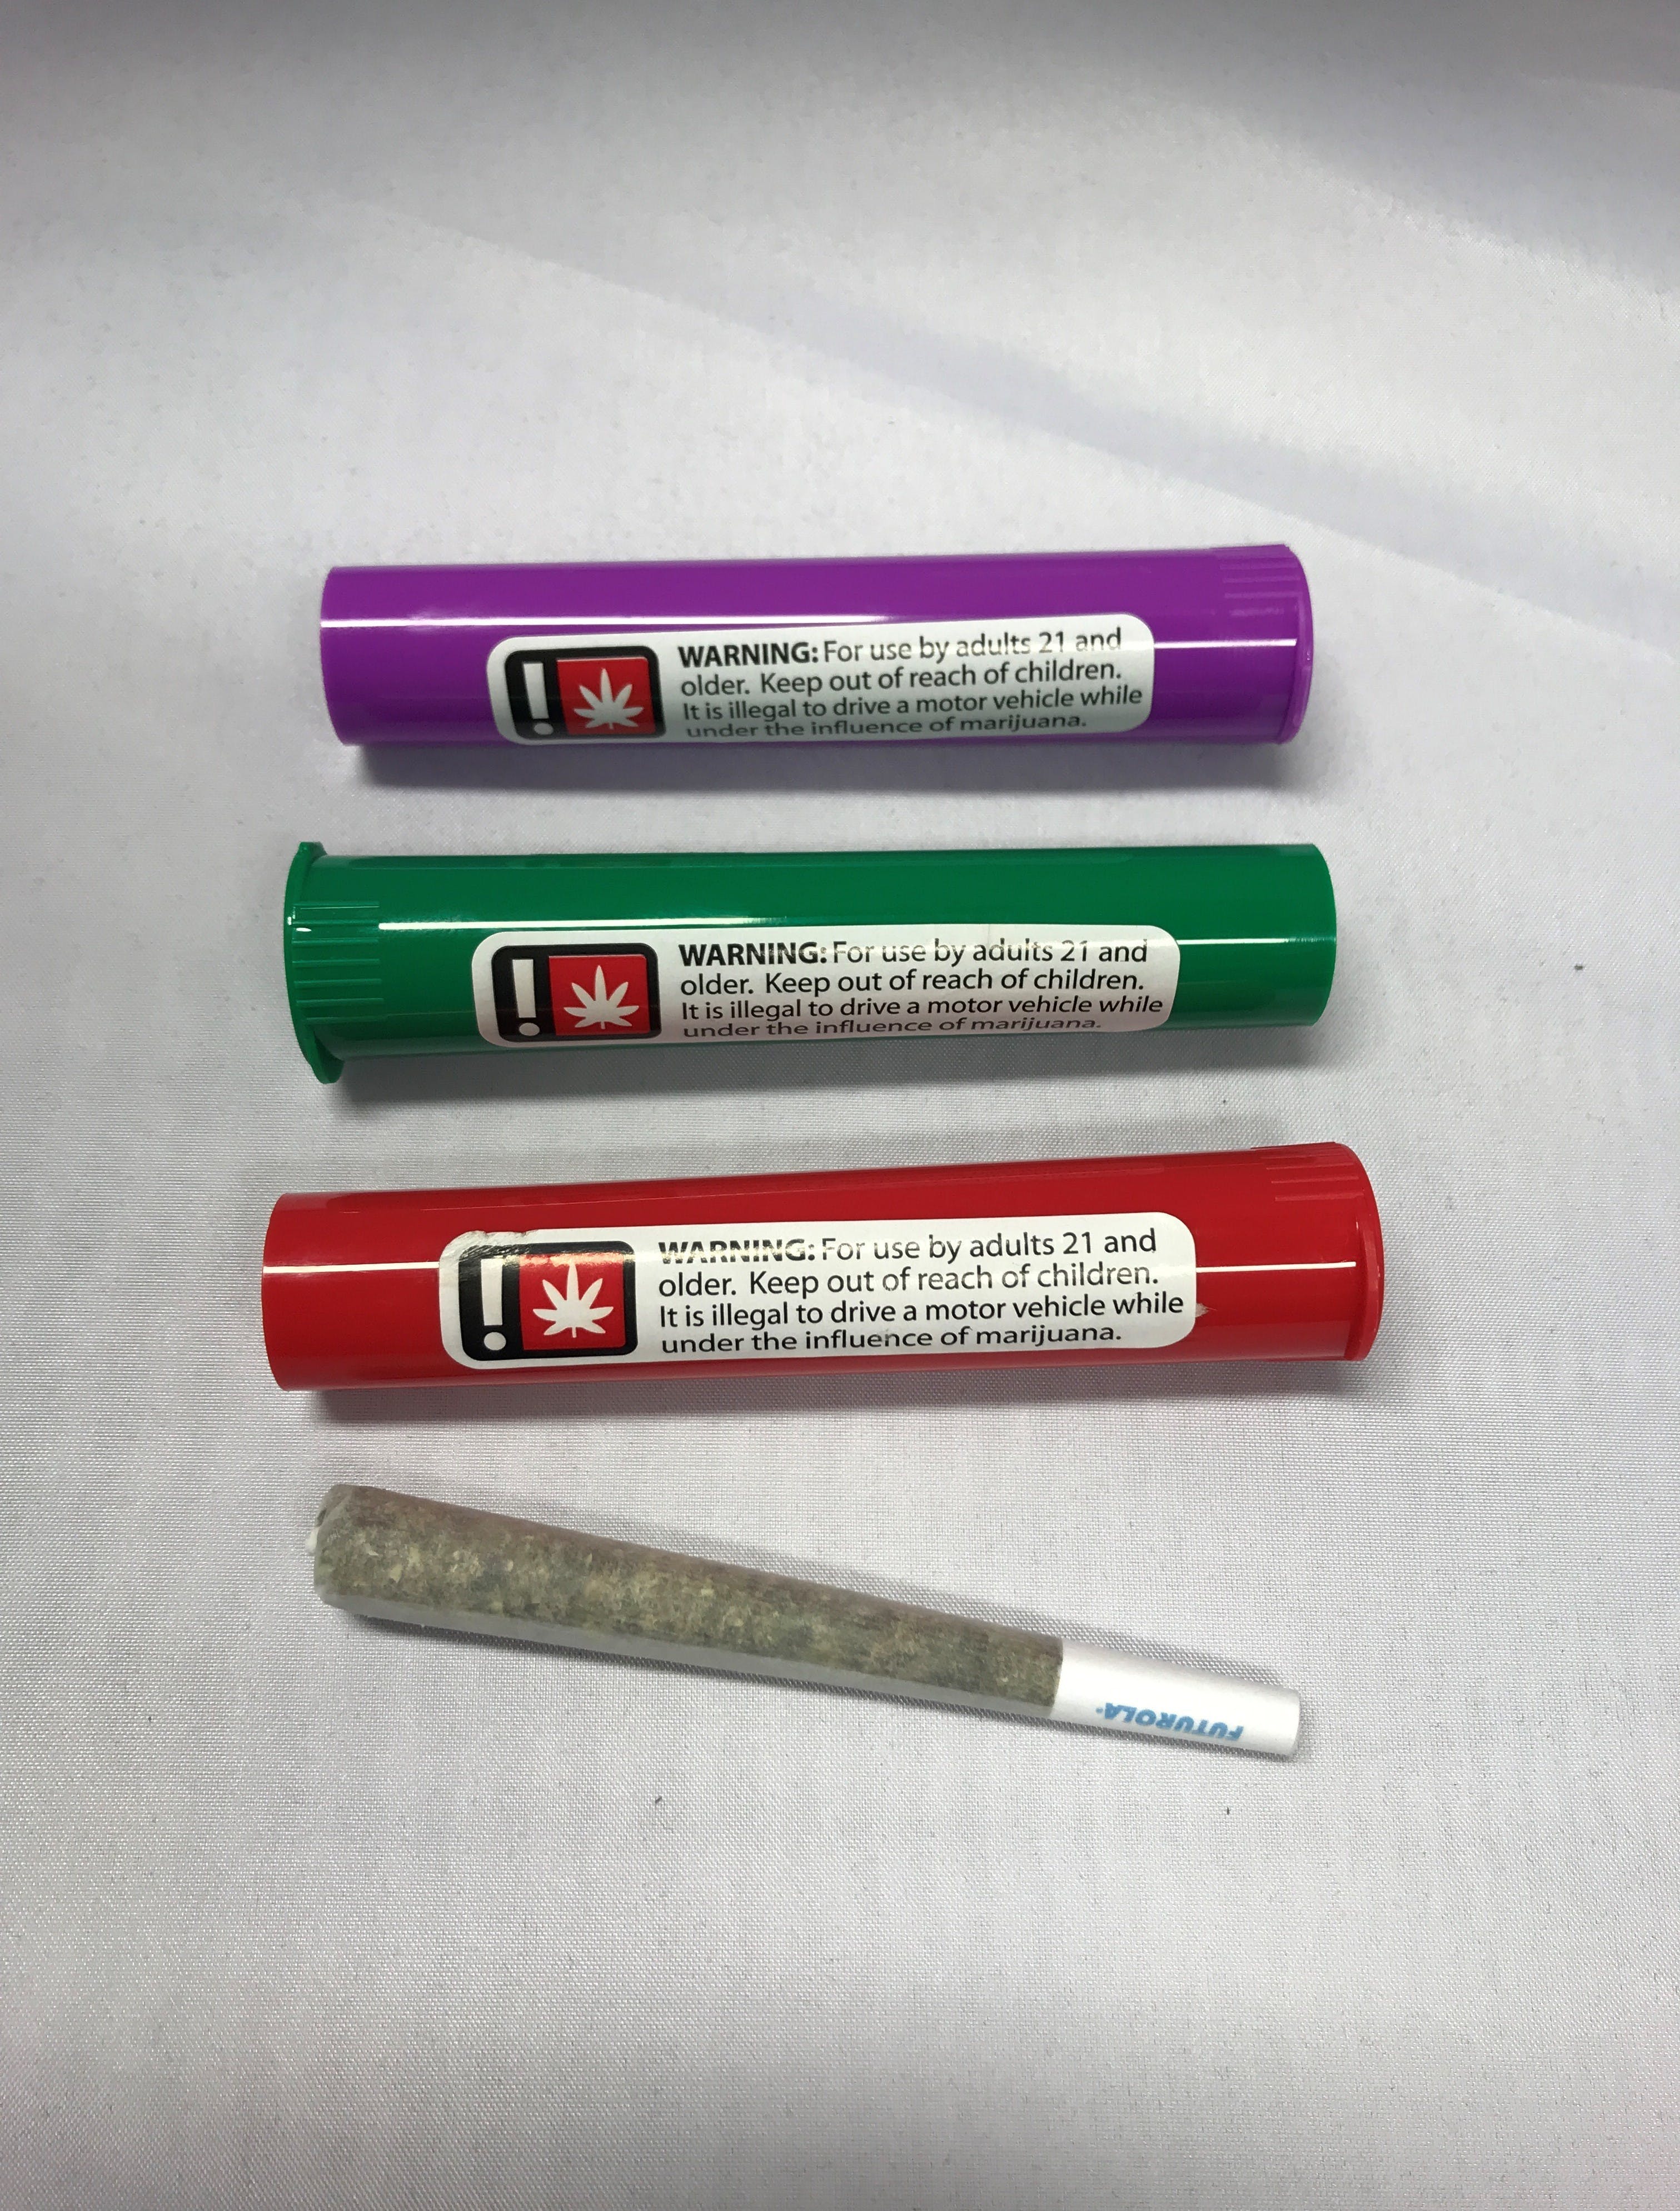 preroll-2331-7-points-freedom-cbd-joint-0-5g-m0836